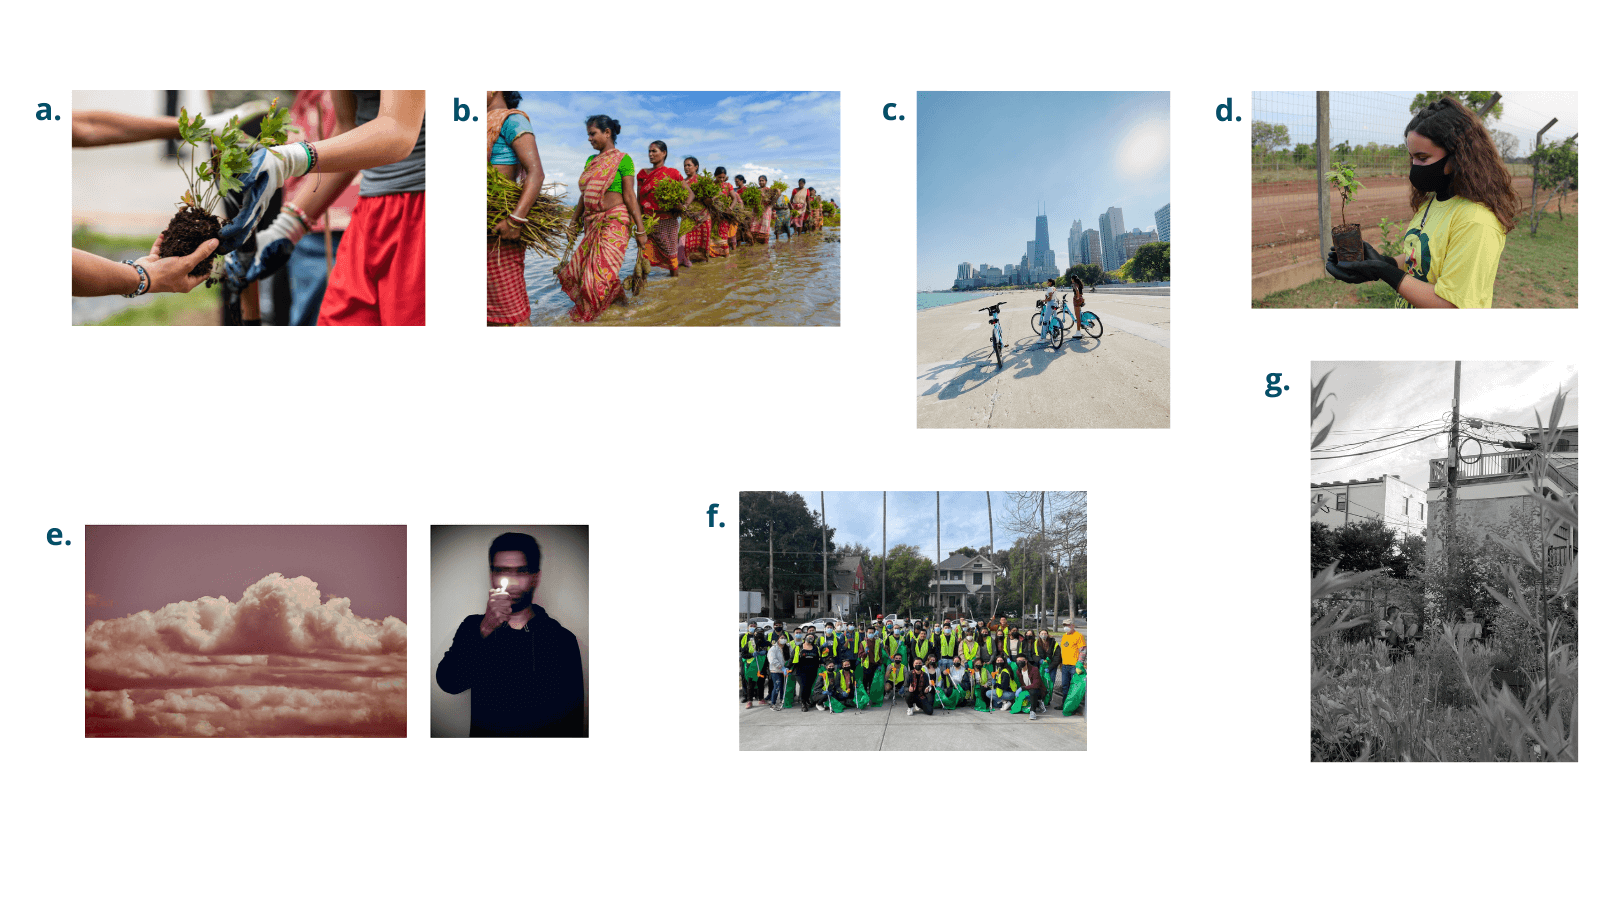 A compilation of the honorable mentions. The first is an image of a person handing another person planted parsely. The second image is of women in India walking throuhg a mangrove. The third image is of 2 women on their bikes taking a break to look over the hudson river. THe fourth image is of a teen girl in a mask holding a plant in a garden. The fifth picture is of pink clouds on the left and a man holding a lighter in front of his eyes on the right. The sixth image is of San Jose State University members after cleaning up their neighborhood. The seventh image is of two men sitting in an alley way garden in Washington, DC. The image is black and white.